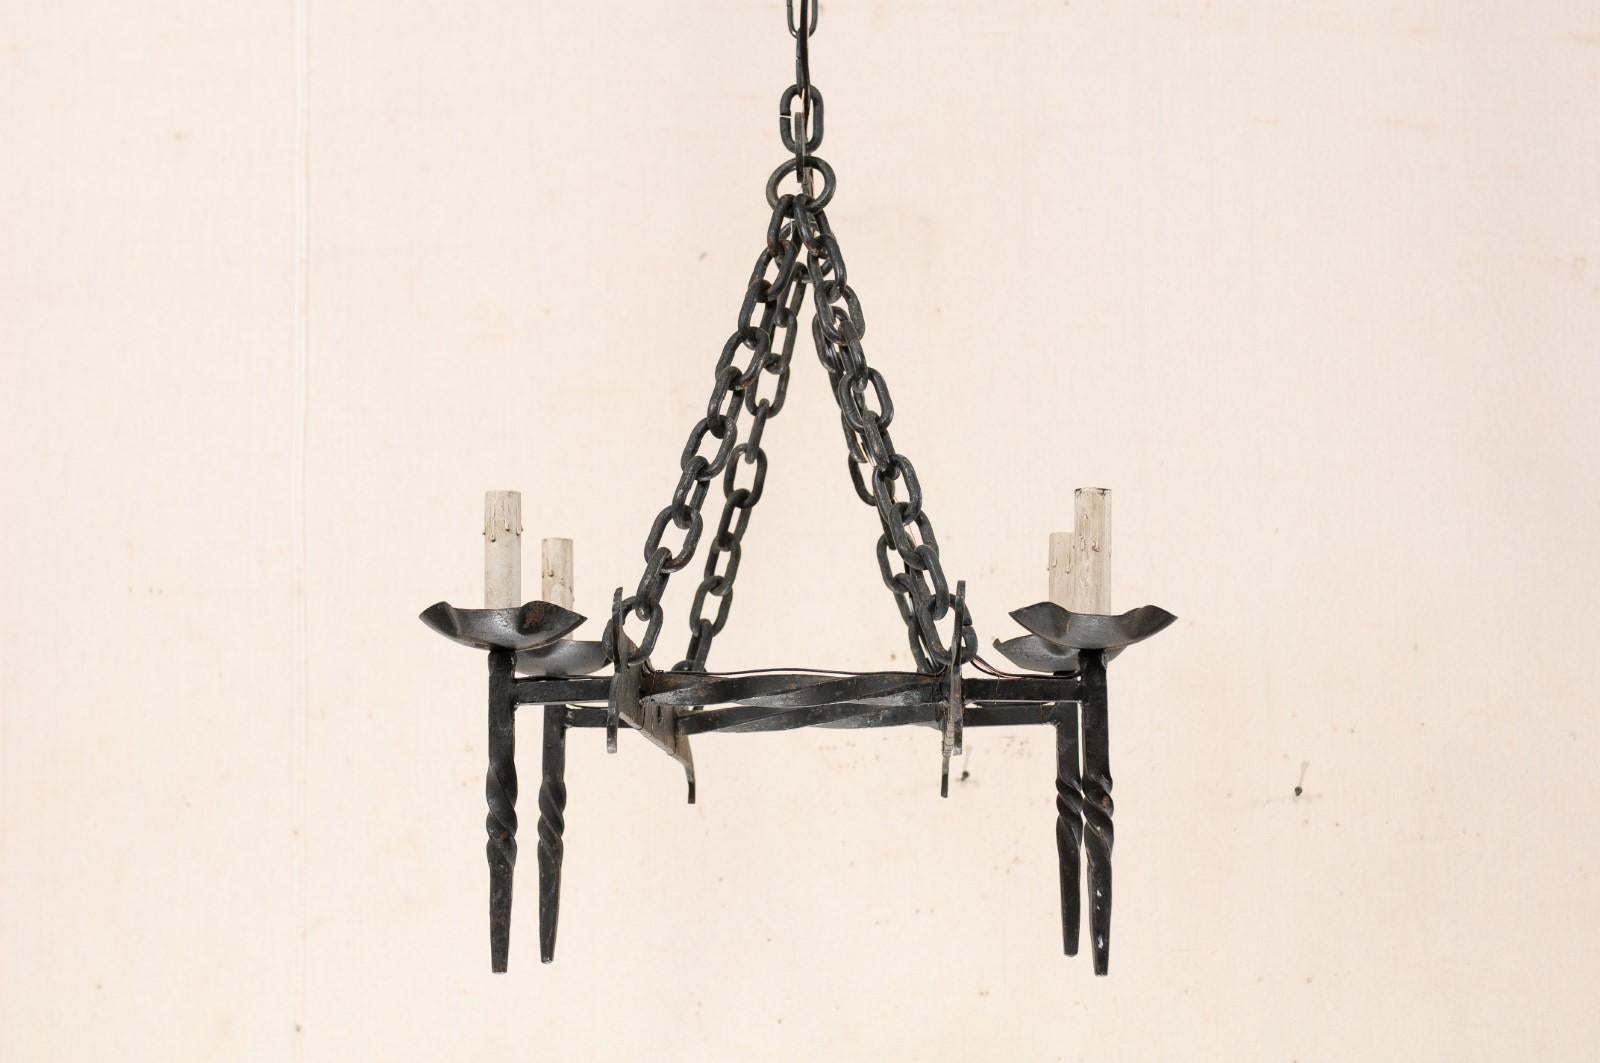 French Crossed-Bar Four-Light Iron Chandelier from the Mid-20th Century In Good Condition For Sale In Atlanta, GA